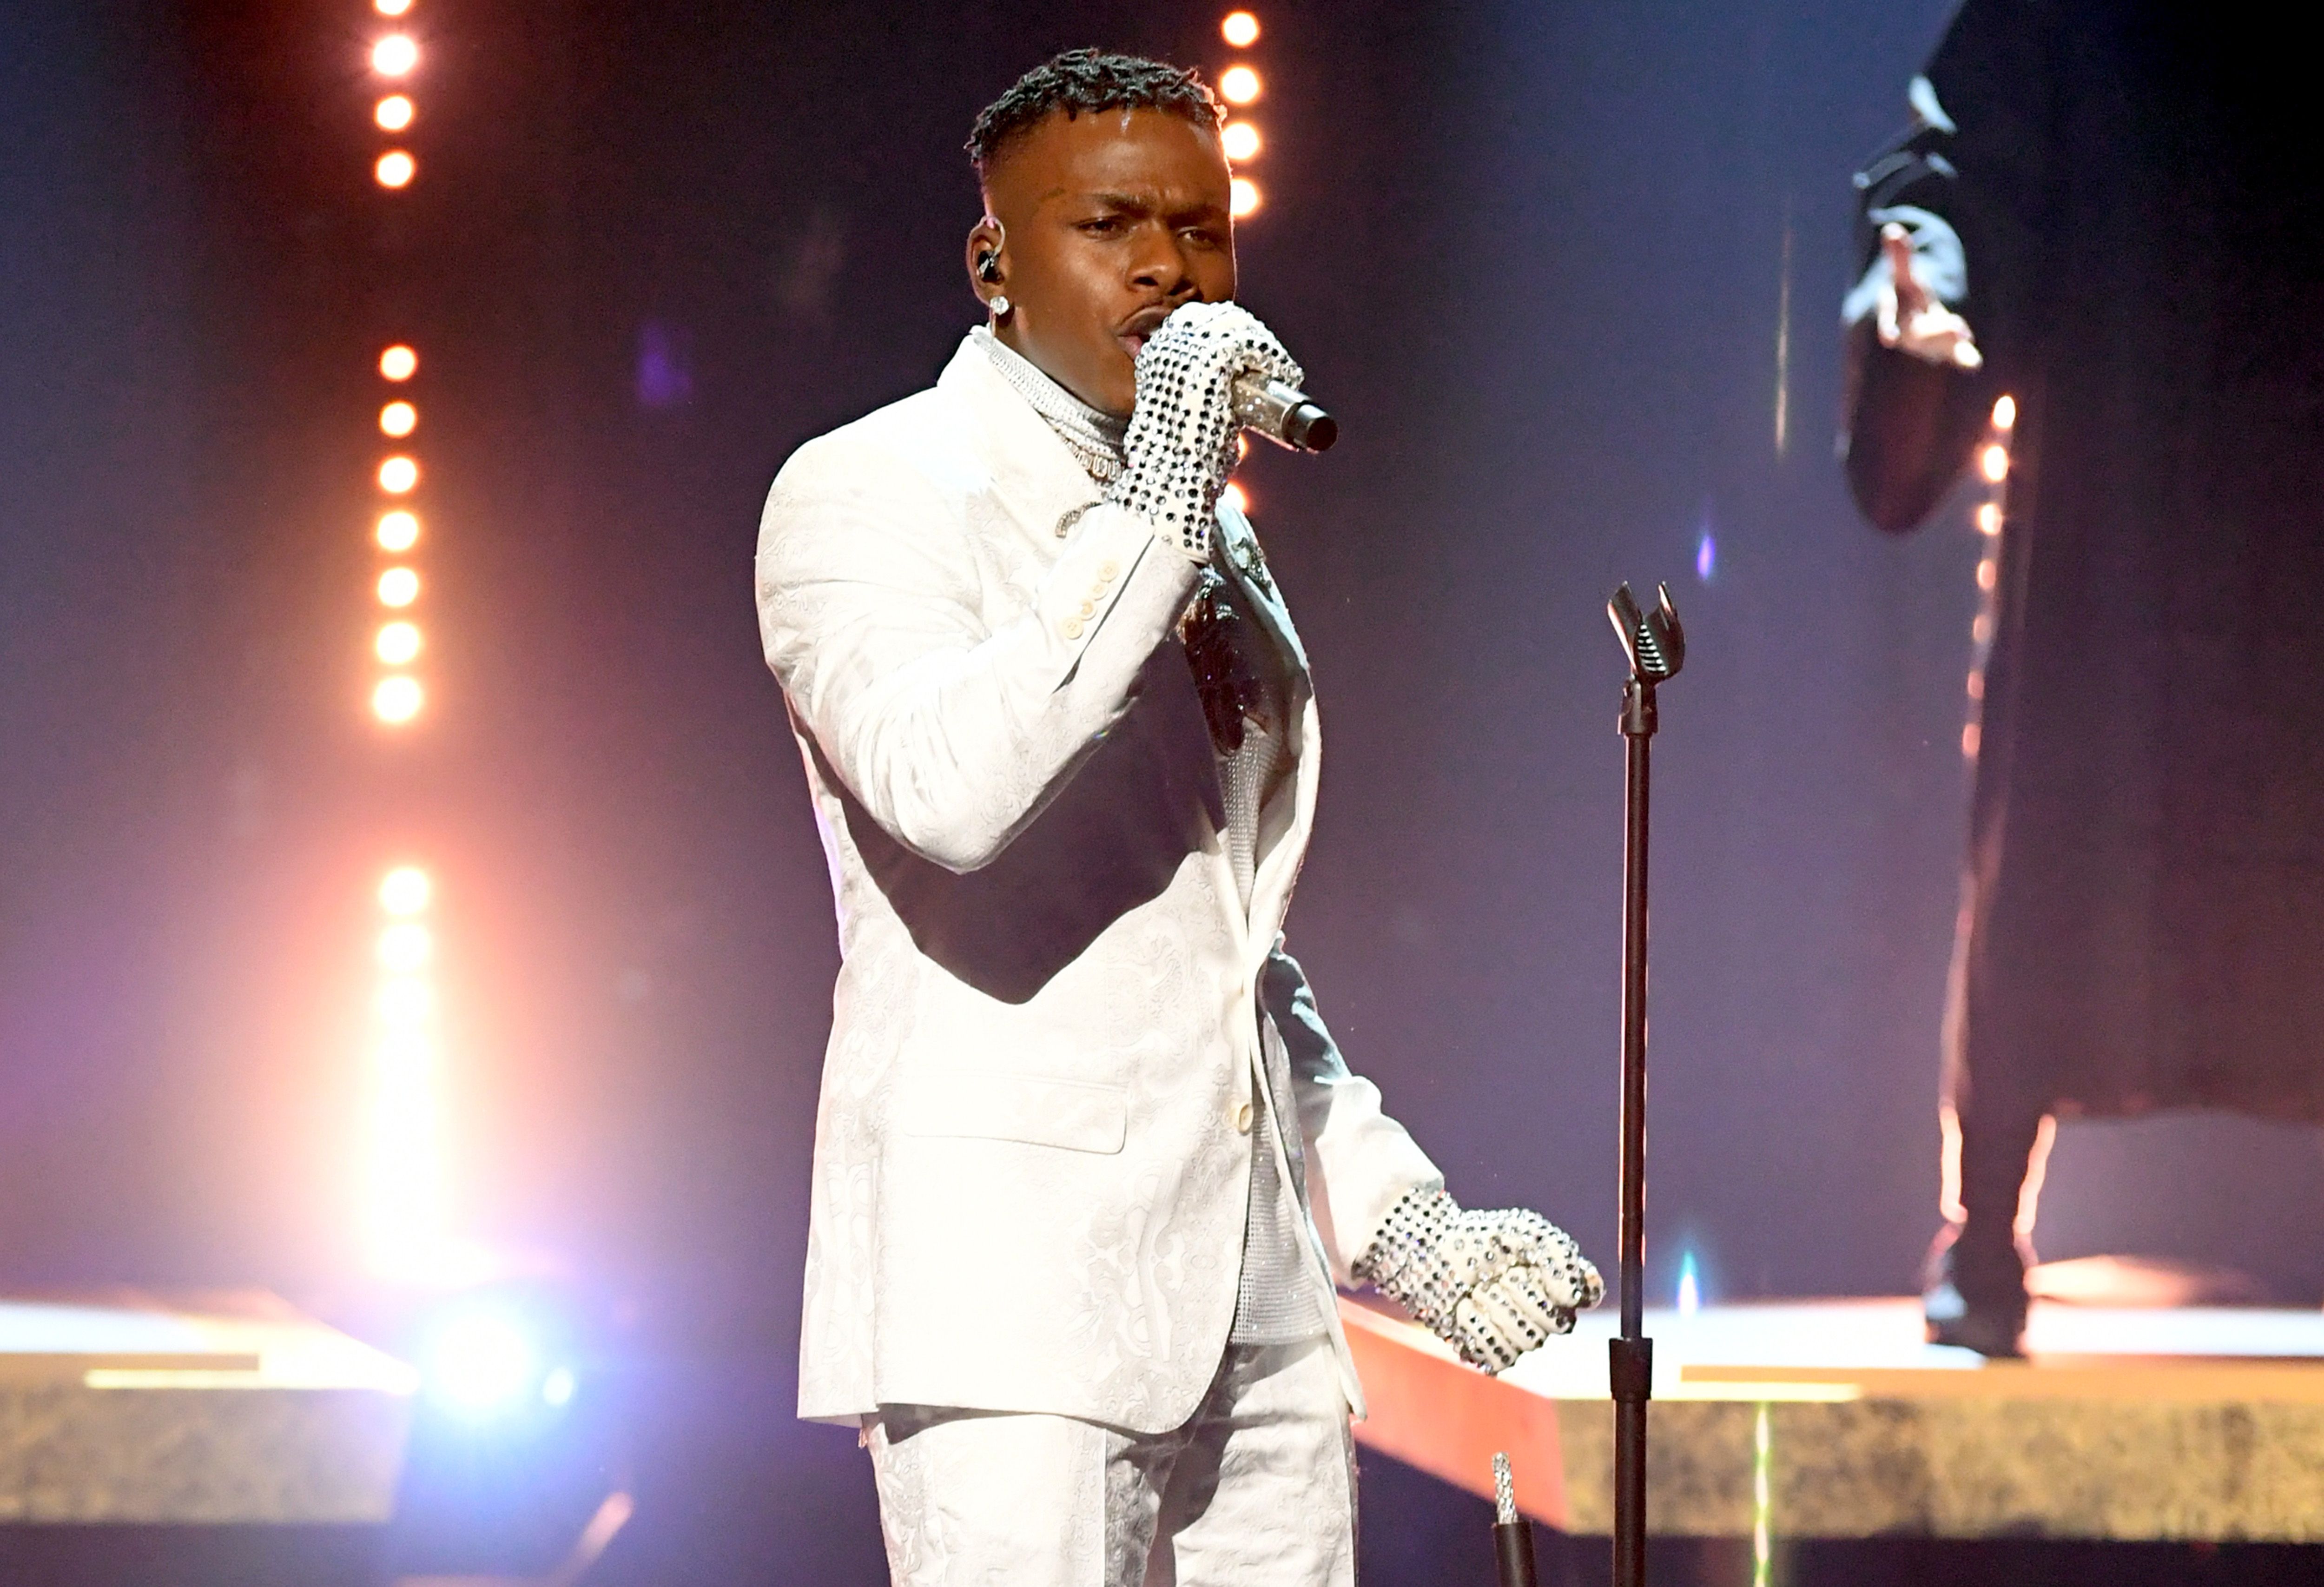 DaBaby Rocks a Flashy Printed Suit For Grammys 2021, 2021 Grammys, DaBaby,  Grammys